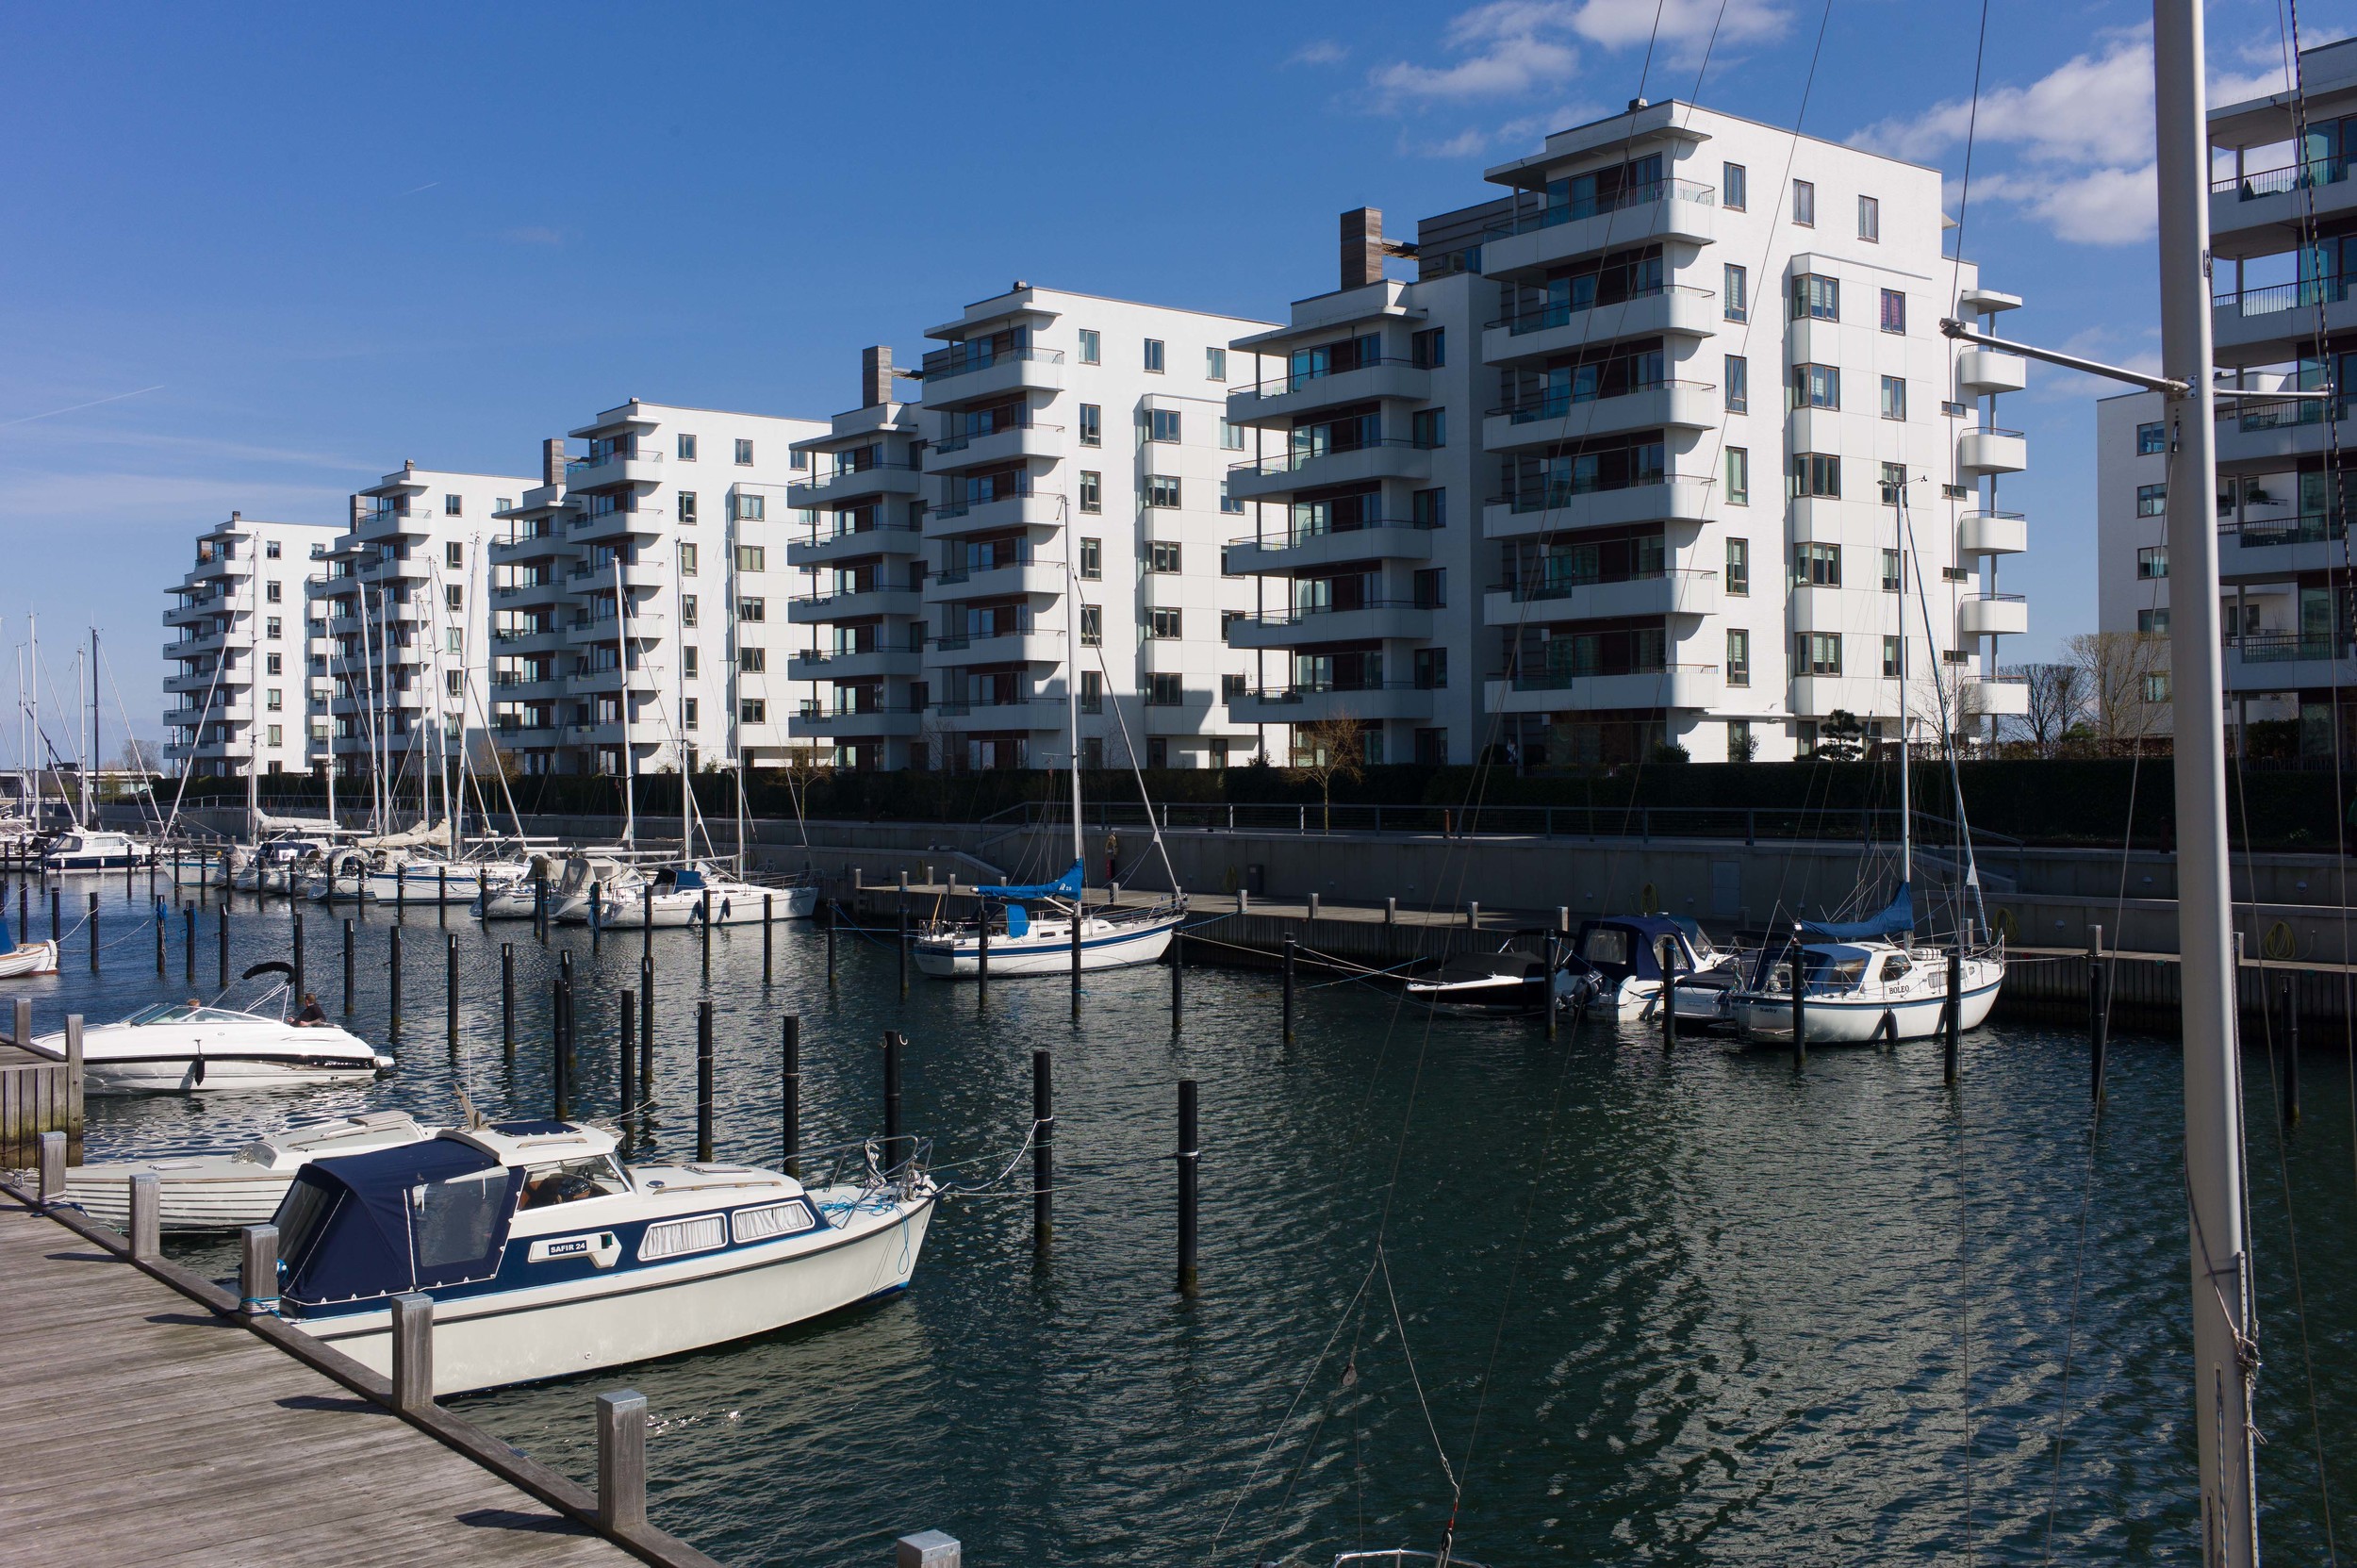   apartments on the south quay of the Tuborg dock - Tuborg Havnepark by Dissing and Weitling and completed in 2008  